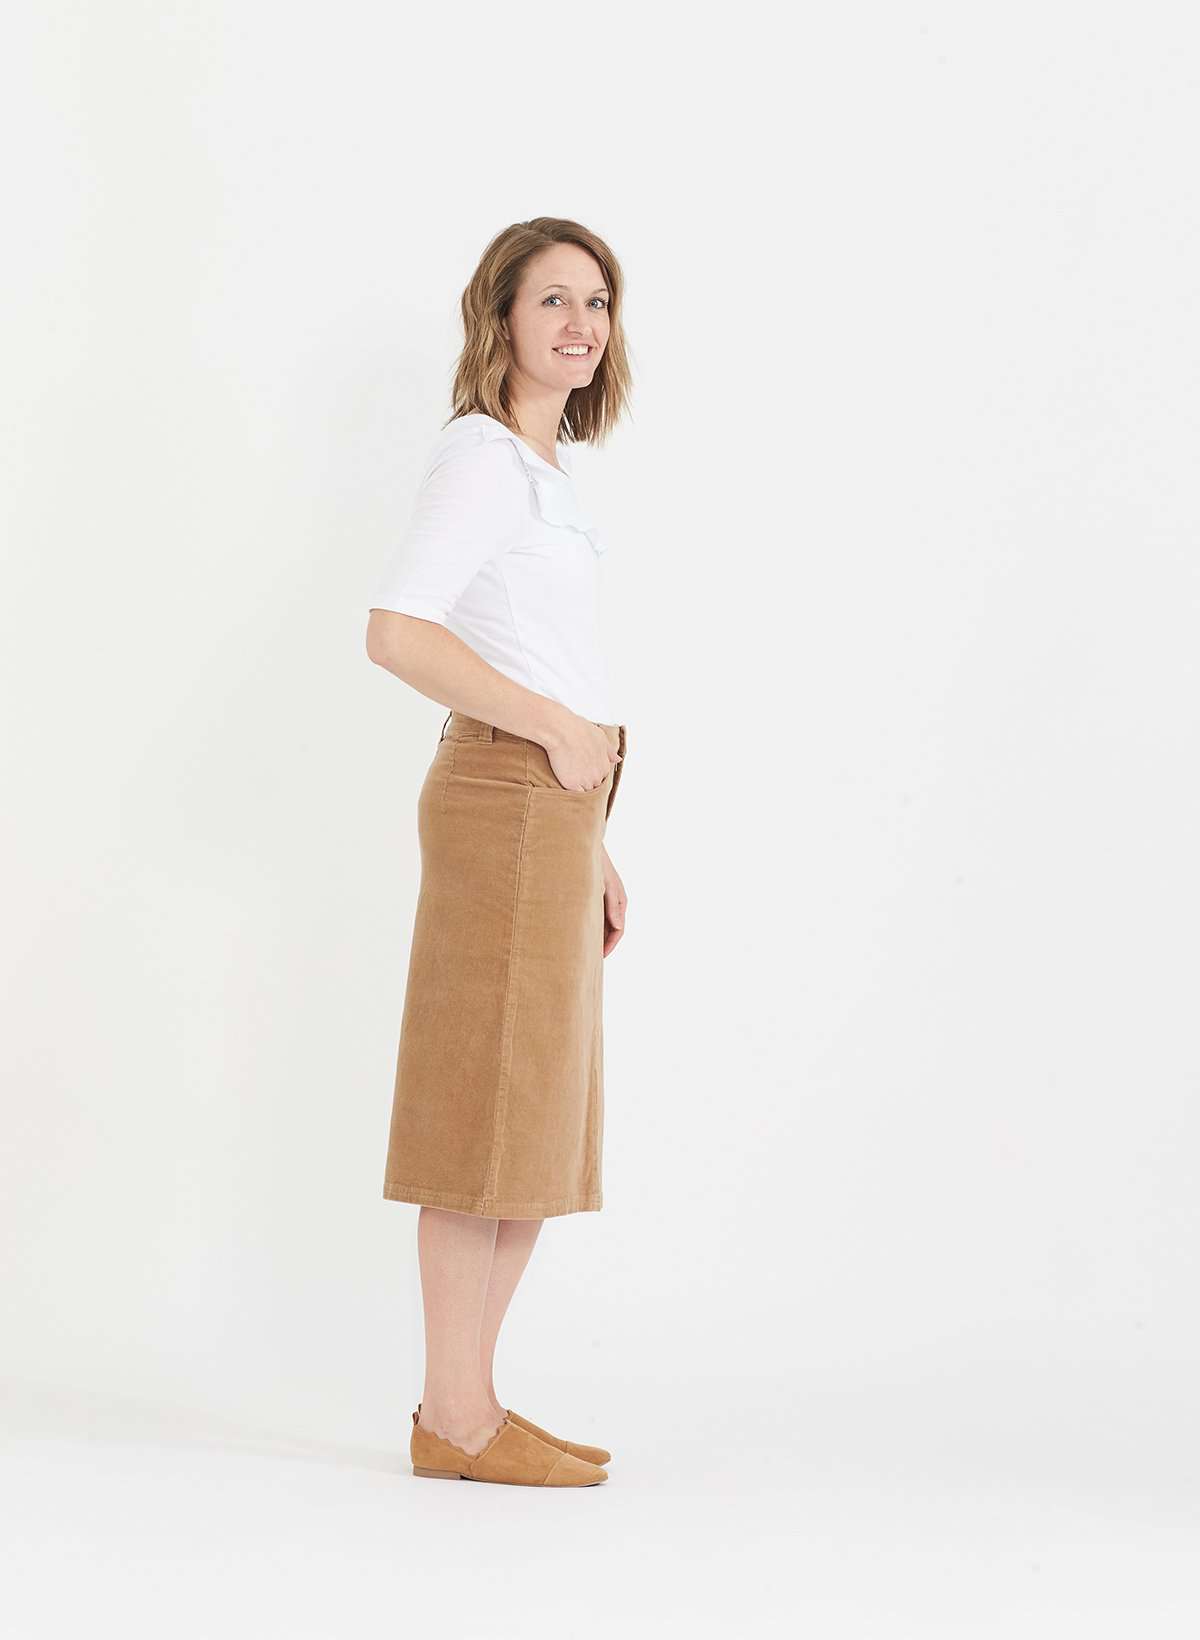 Woman wearing a below the knee corduroy skirt. This skirt is a fin corduroy with a gold button snap, no slit and no back pockets. It comes in burgundy, teal, burnt orange and dark khaki.